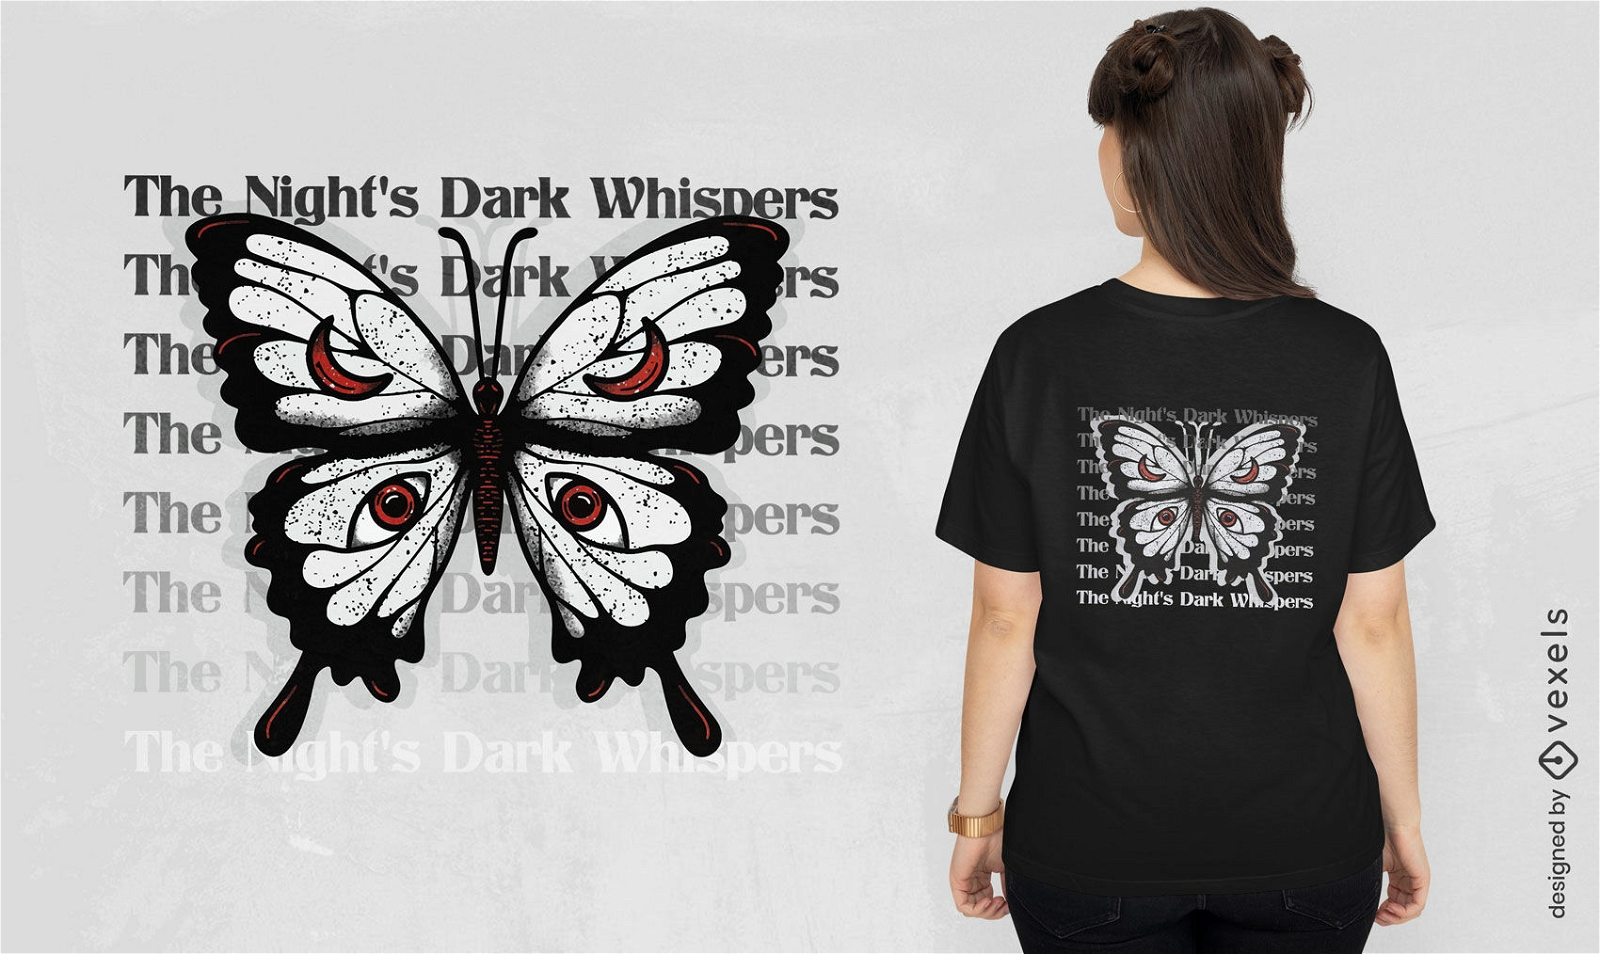 Night's whispers butterfly t-shirt design